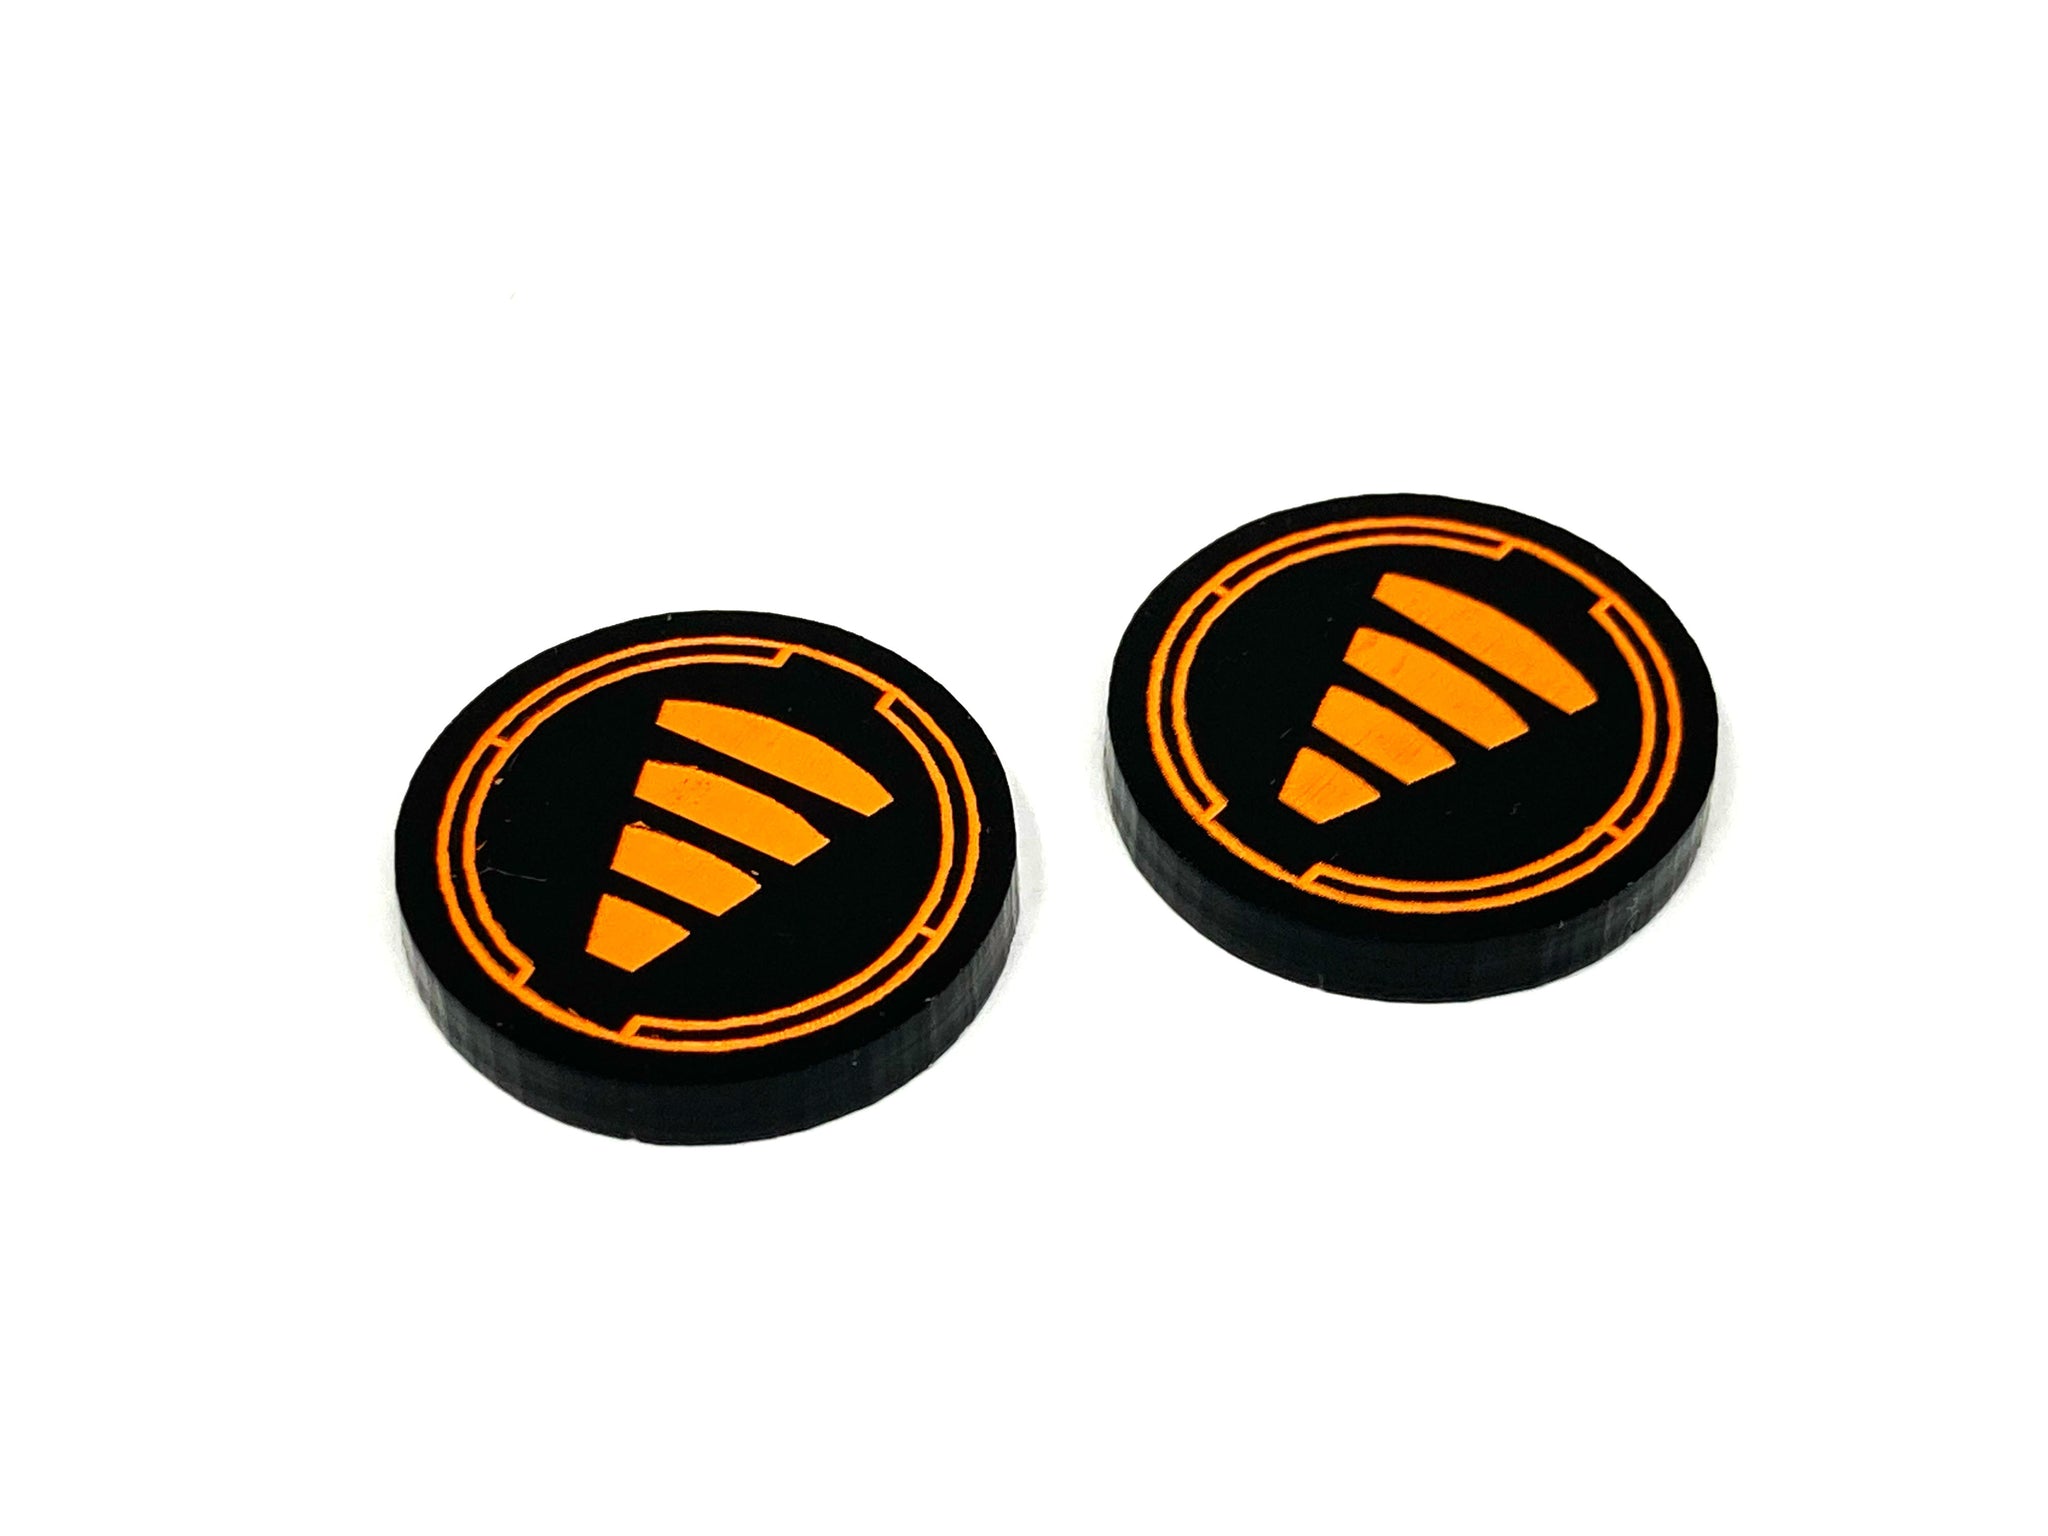 2 x Tractor Beam Tokens - Black Series (single sided)